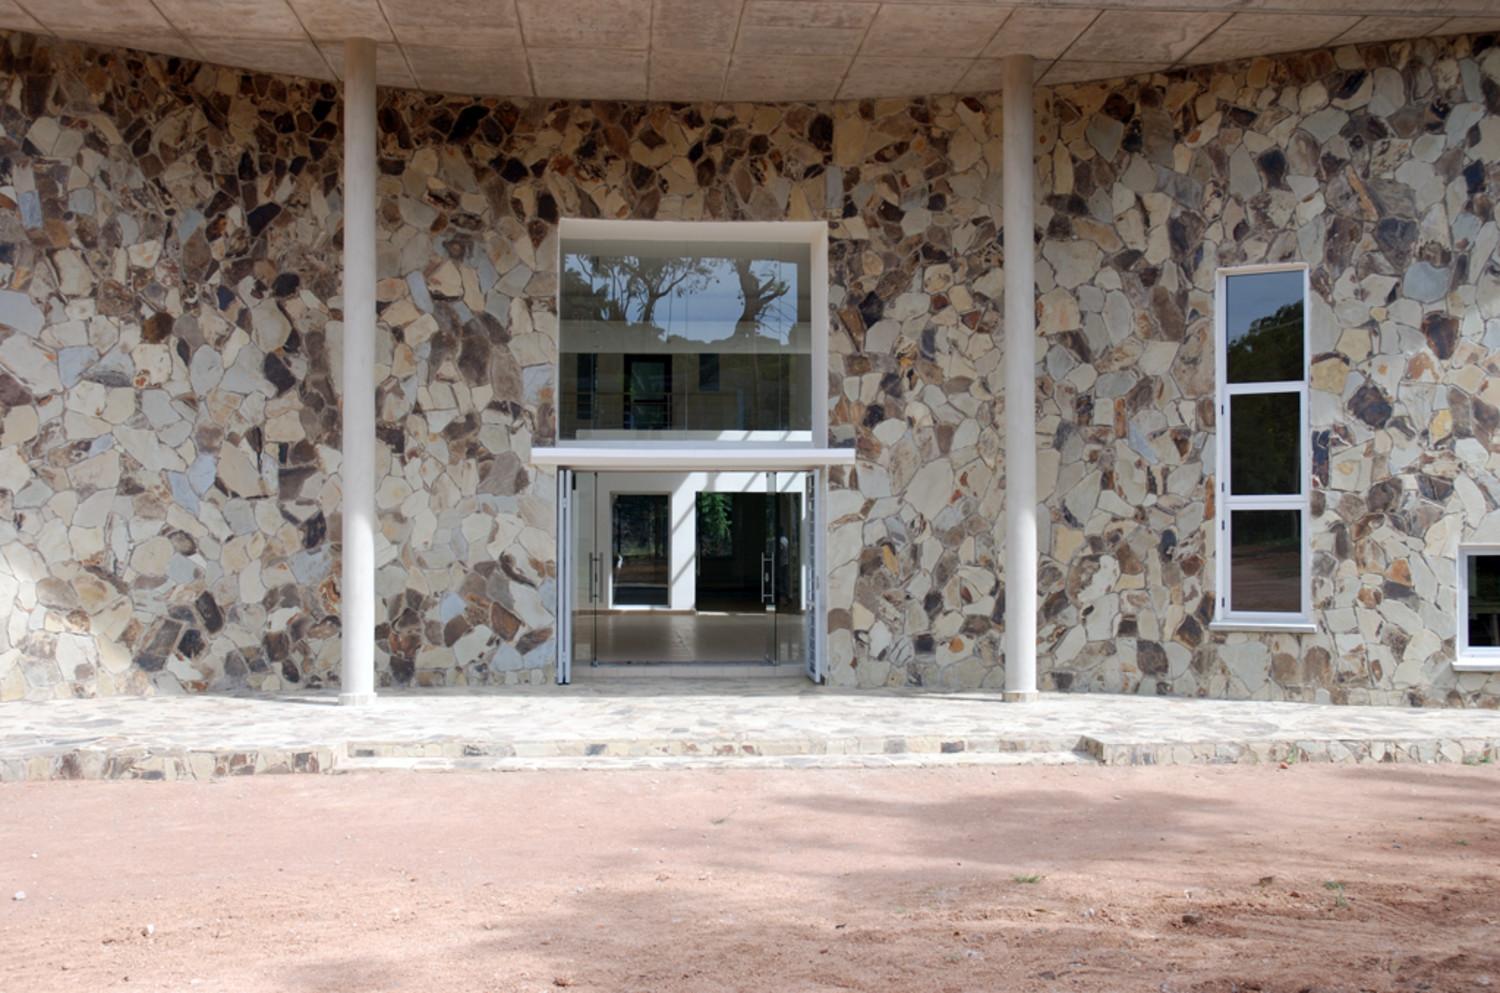 Training Centre and Research Facilities for Mwanza